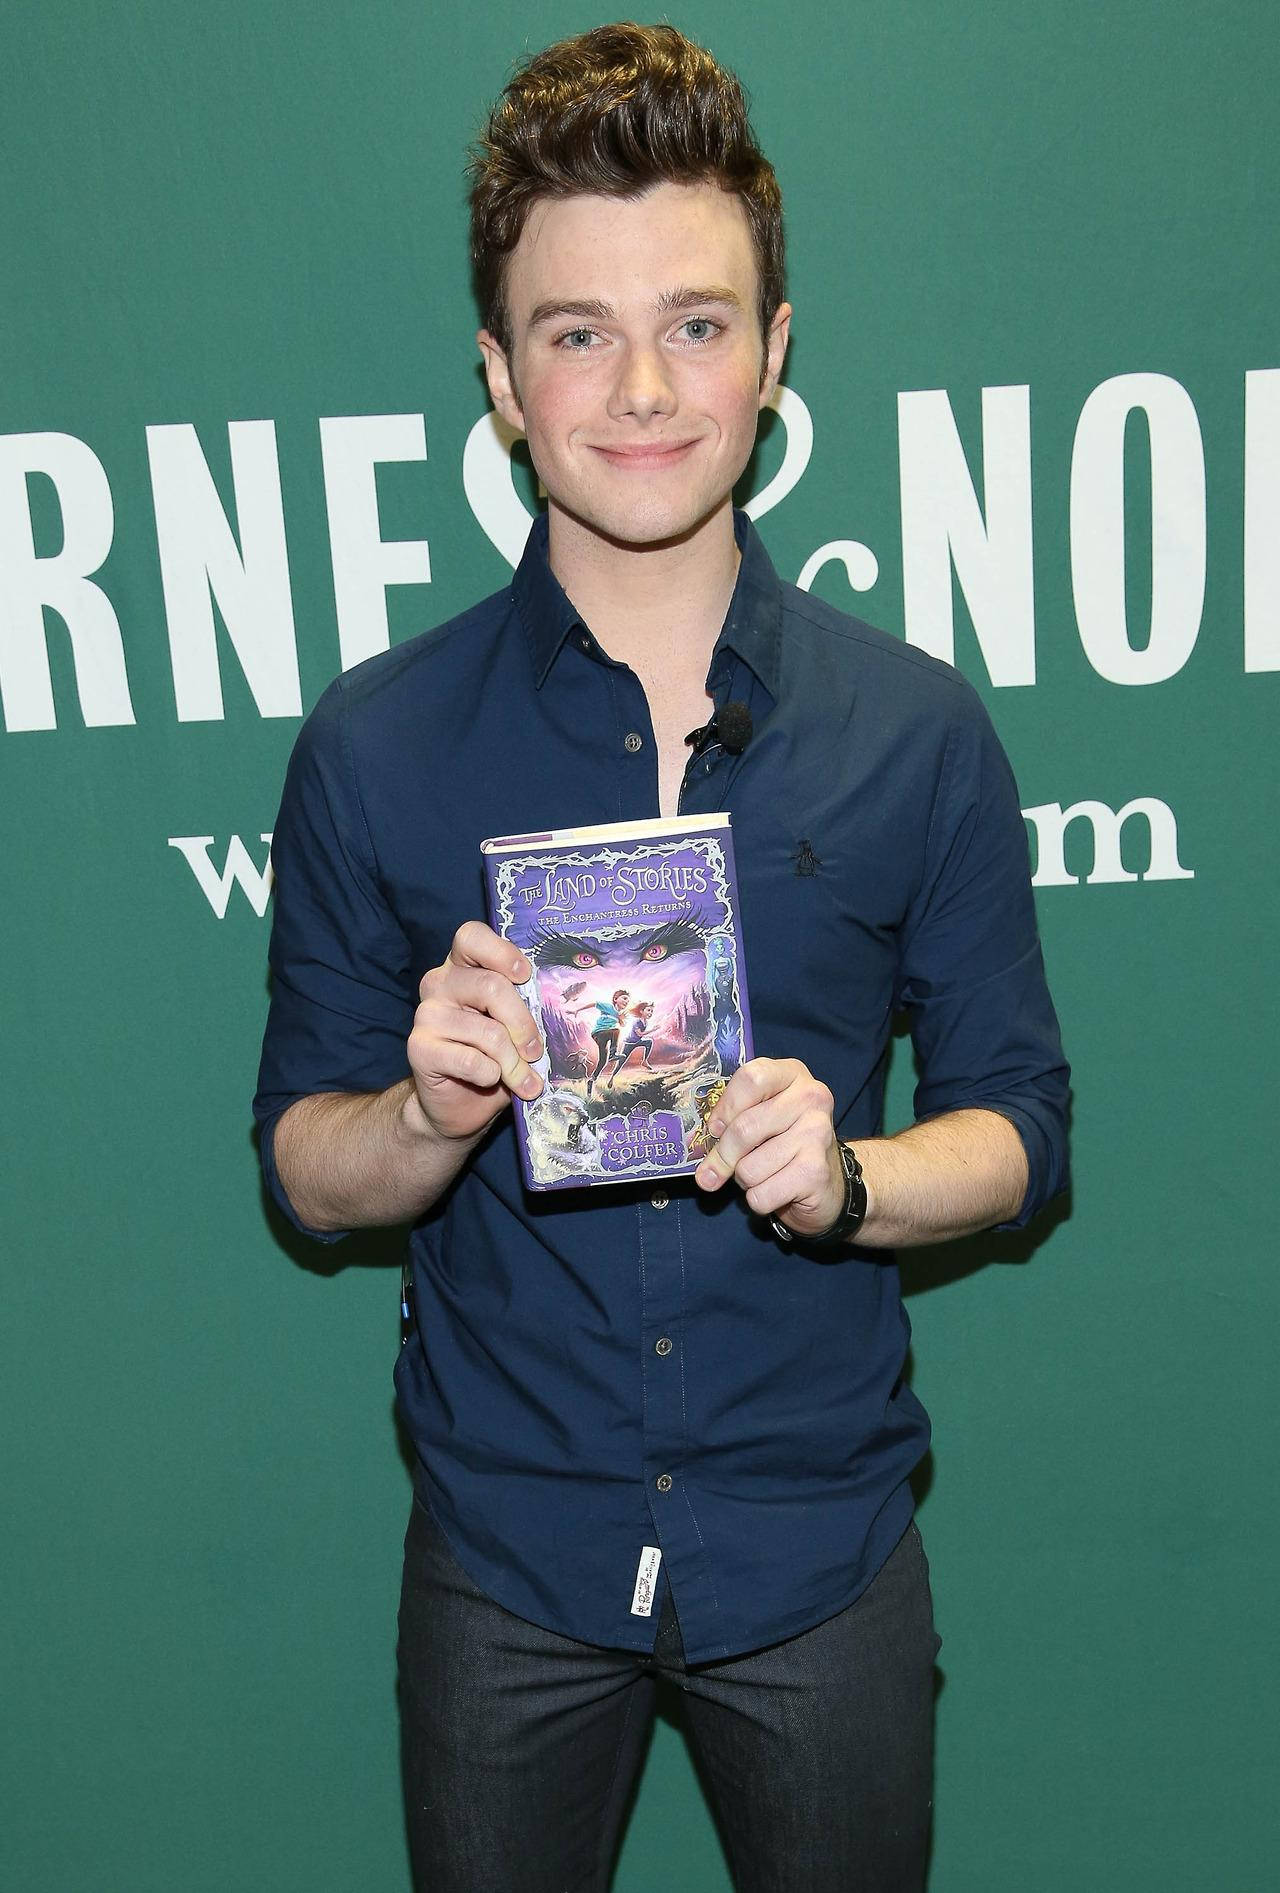 Award-winning author Chris Colfer posing with his best-selling book 'The Land of Stories'. Wallpaper